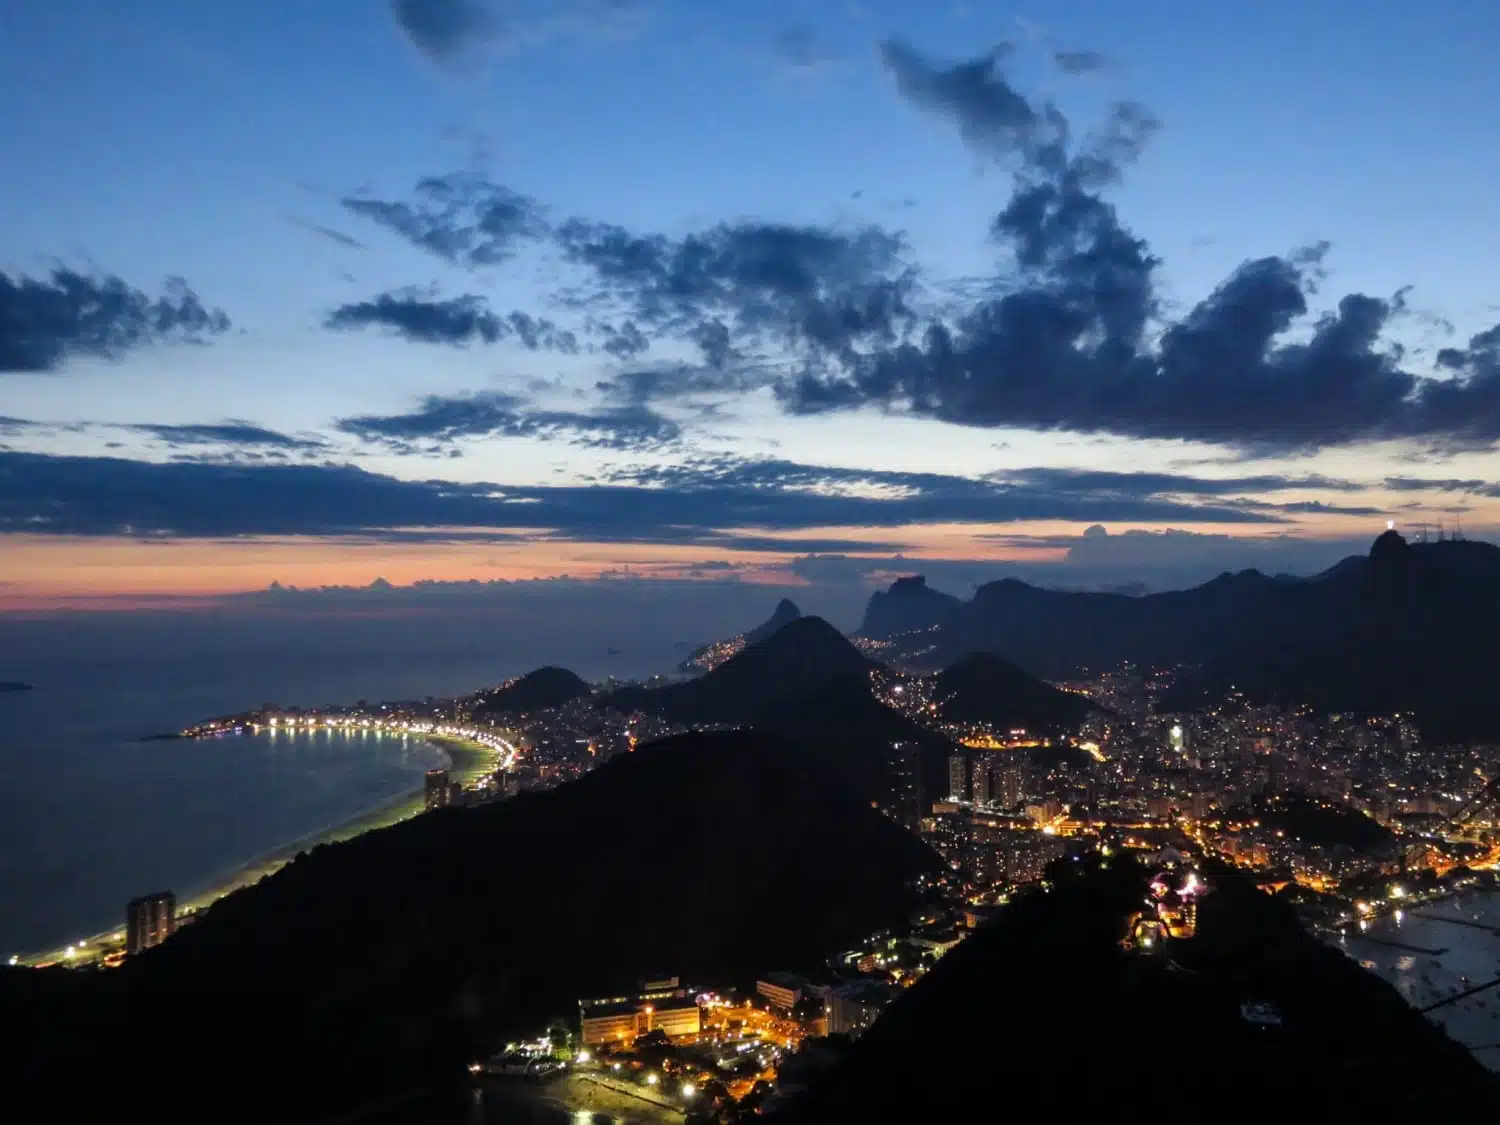 The View at Sunset from the Sugar Loaf Mountain Brazil